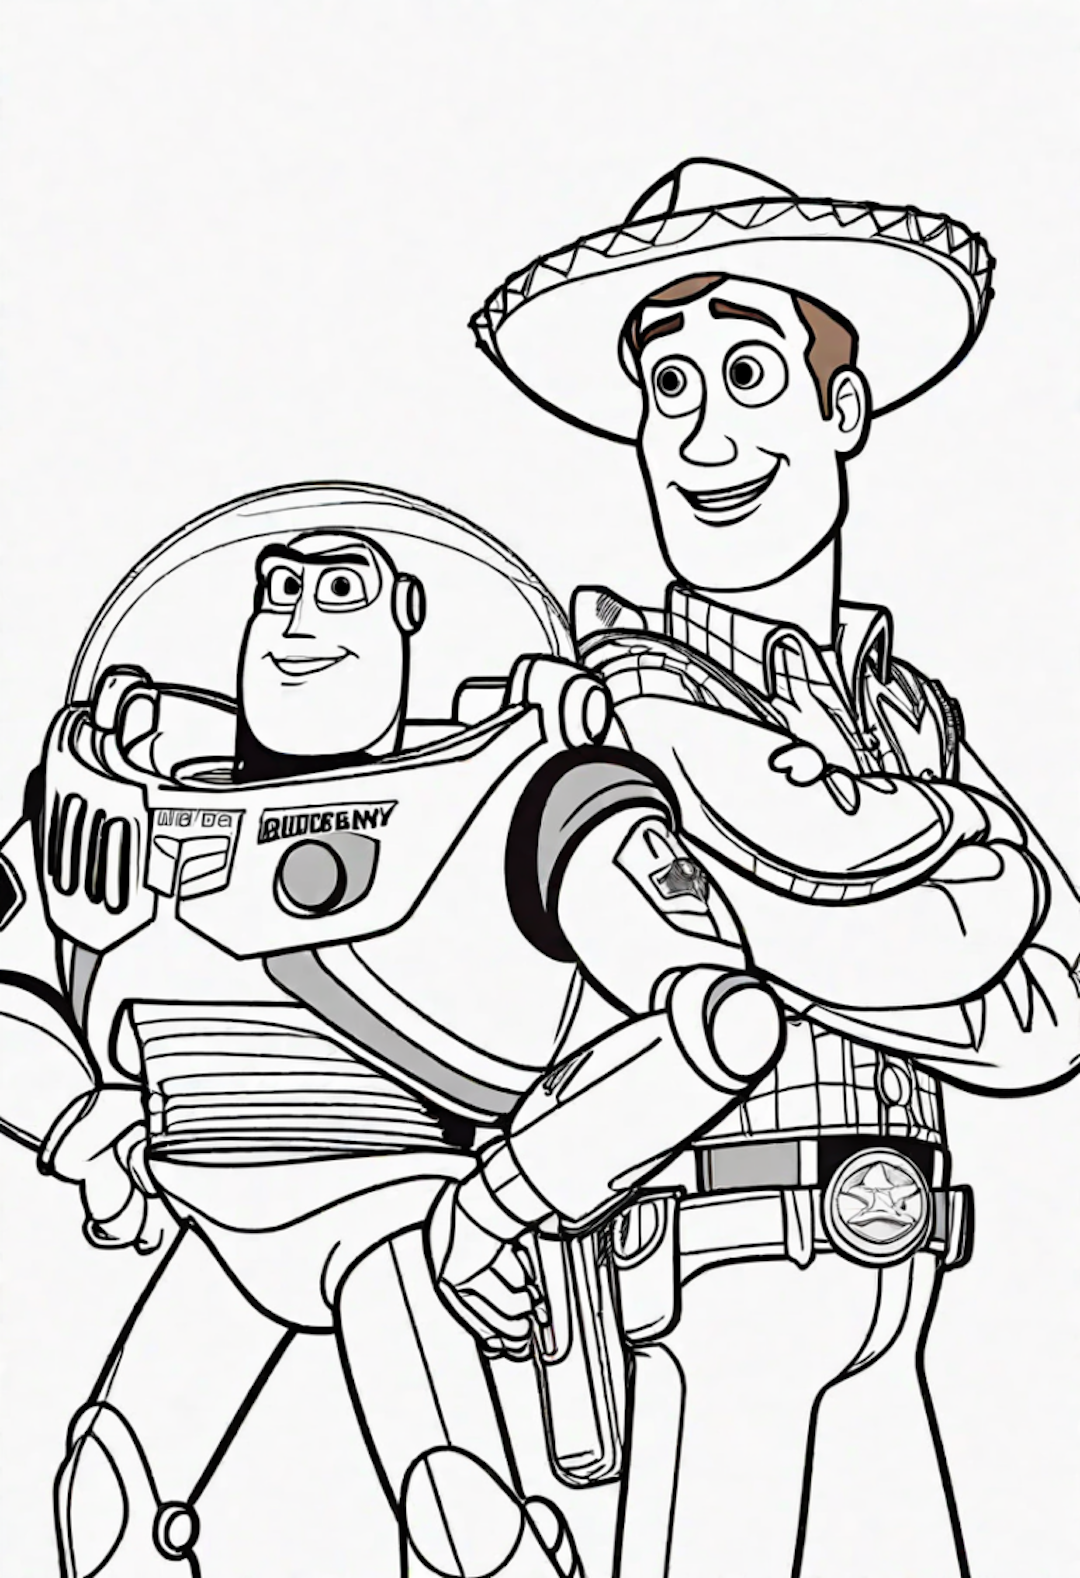 Buzz Lightyear and Woody Coloring Fun! coloring pages